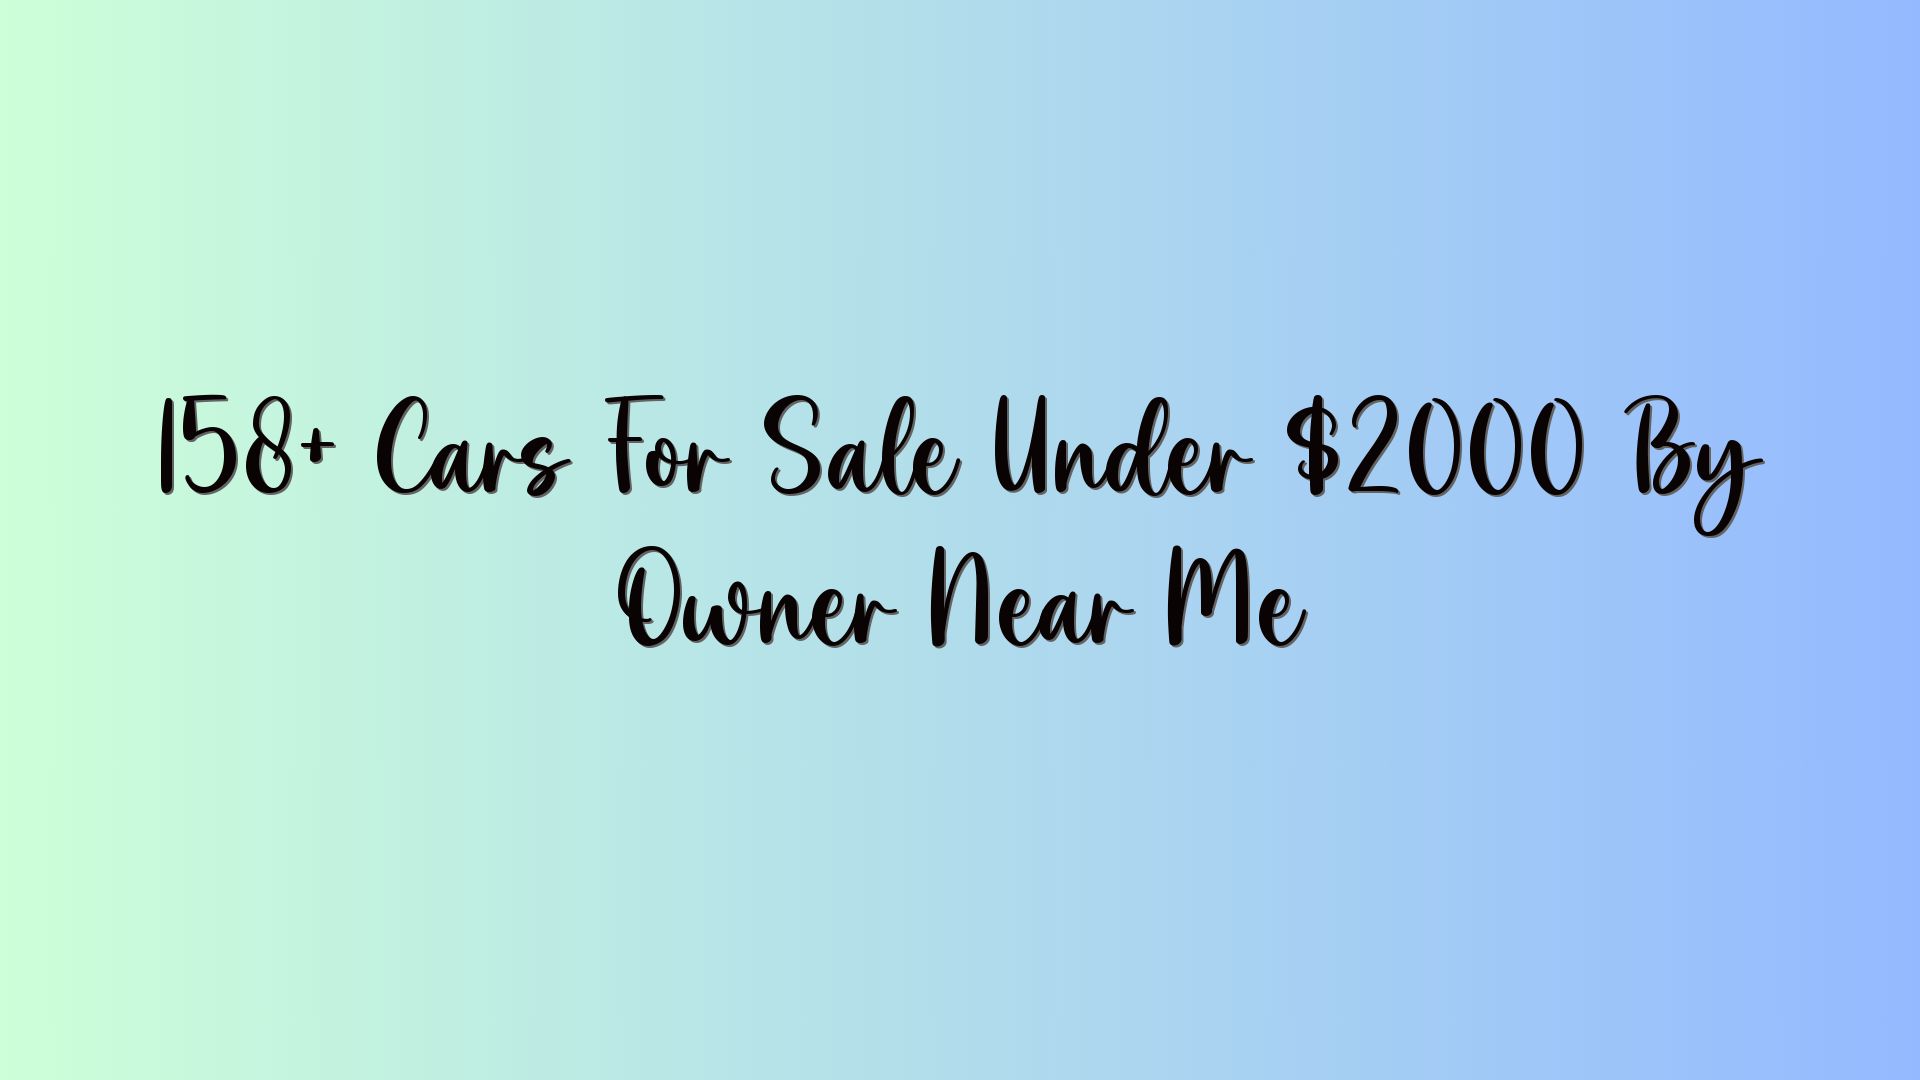 158+ Cars For Sale Under $2000 By Owner Near Me